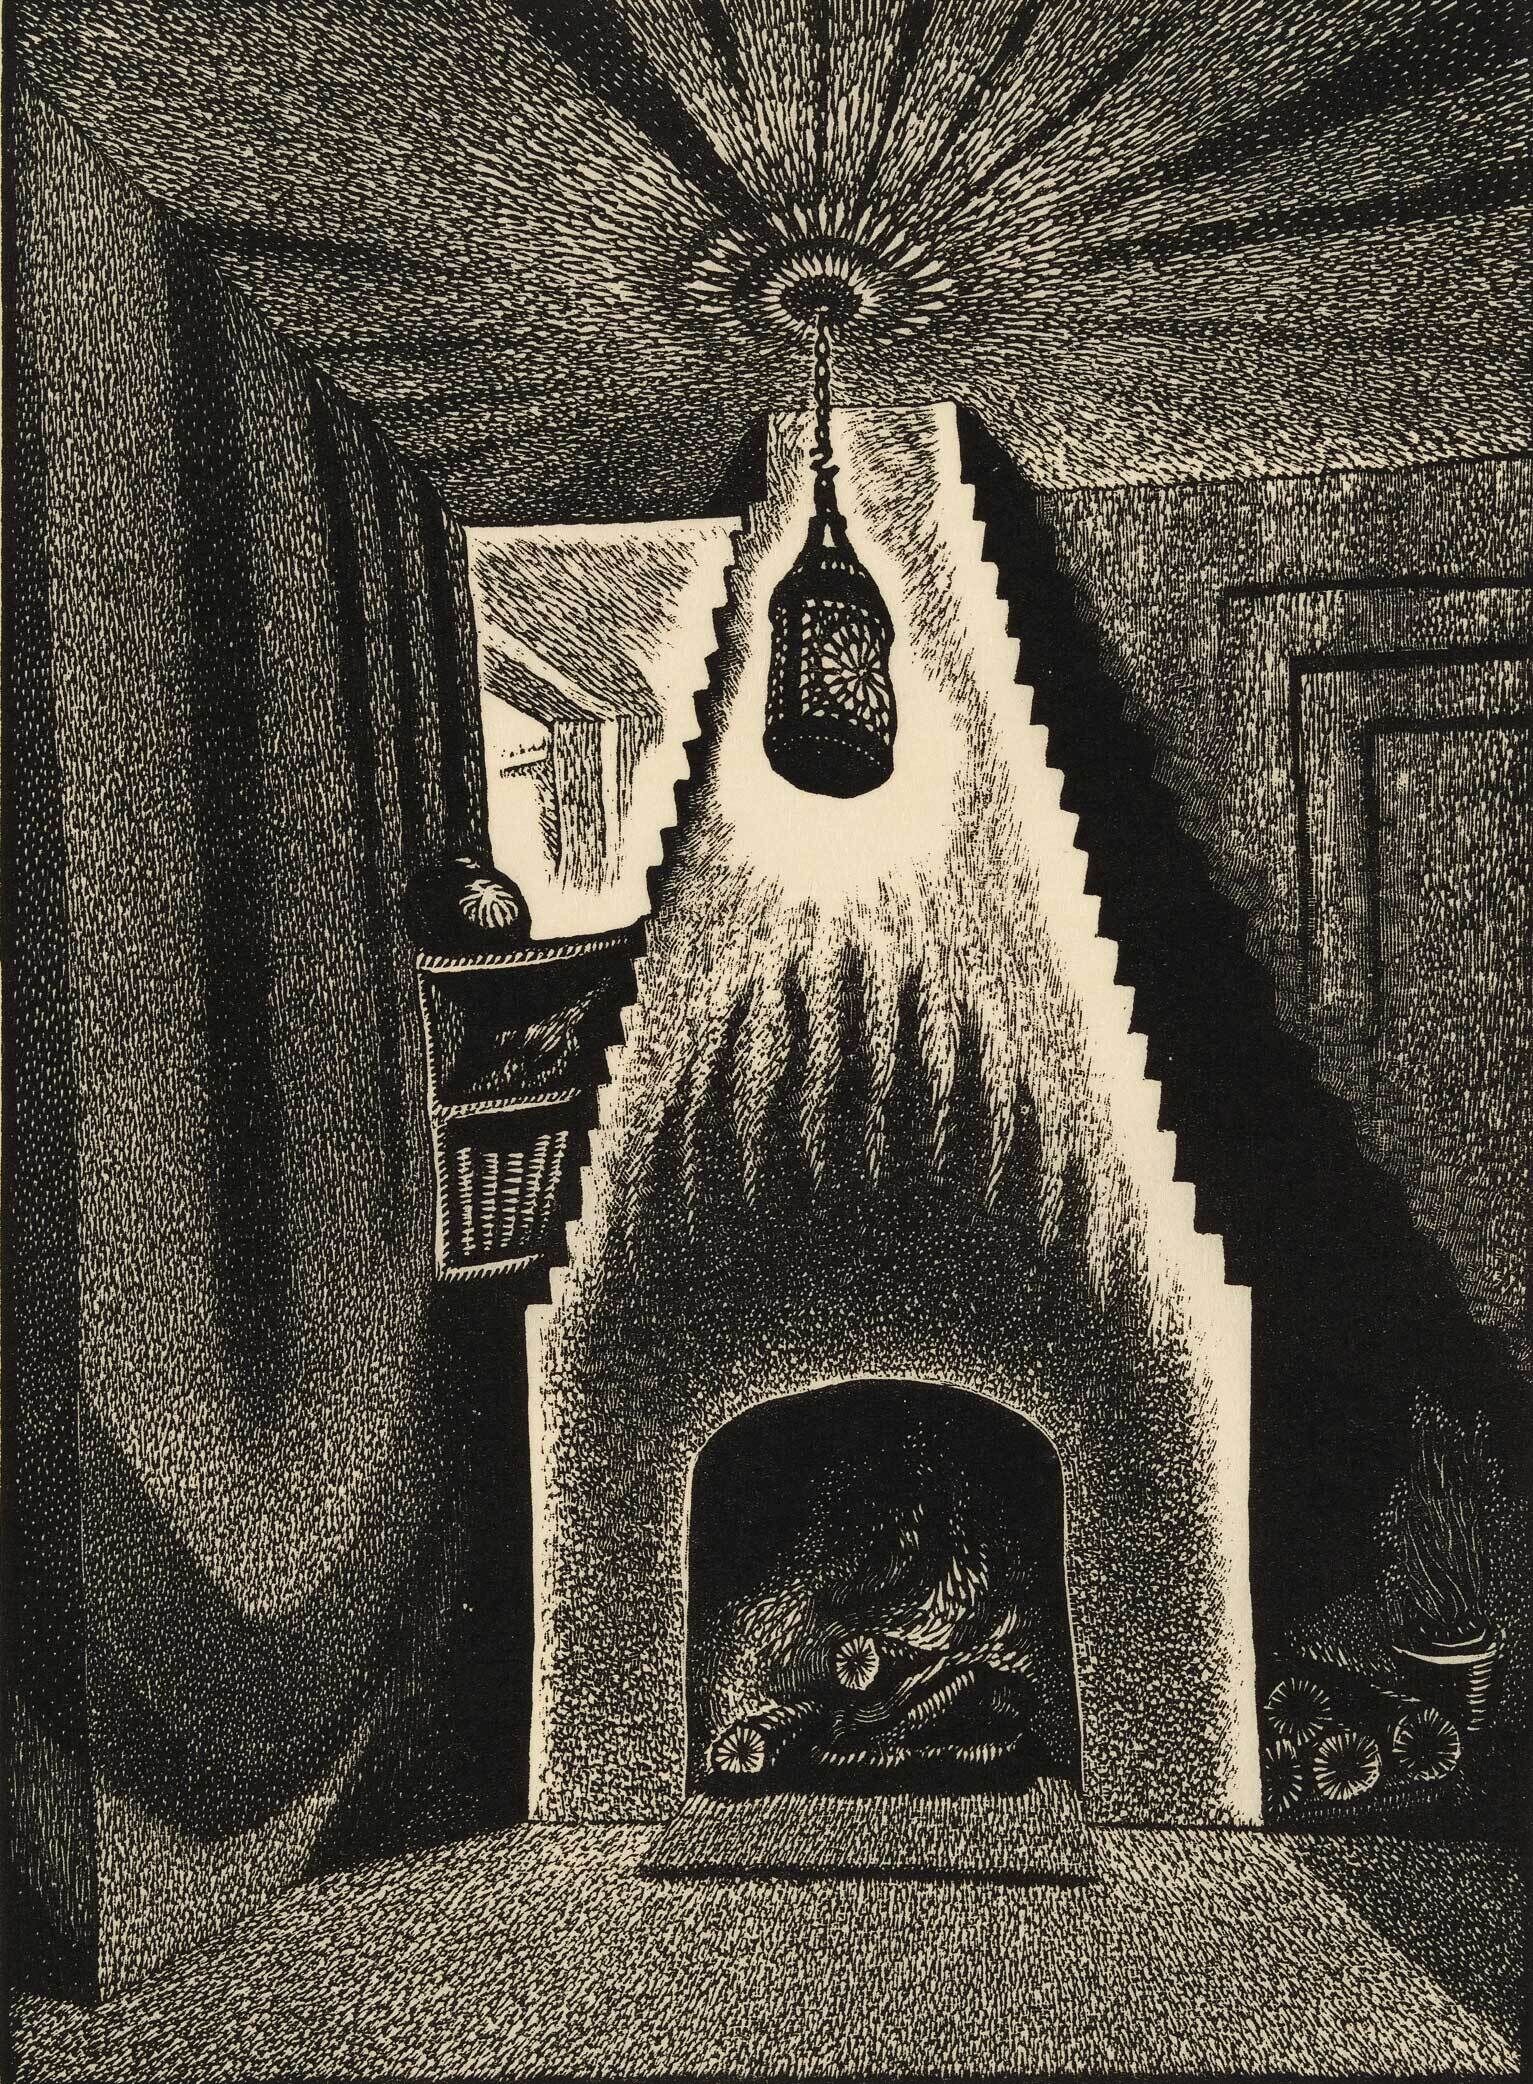 Intricate black and white illustration of a room with a radiant light fixture, arched fireplace, and detailed patterns.